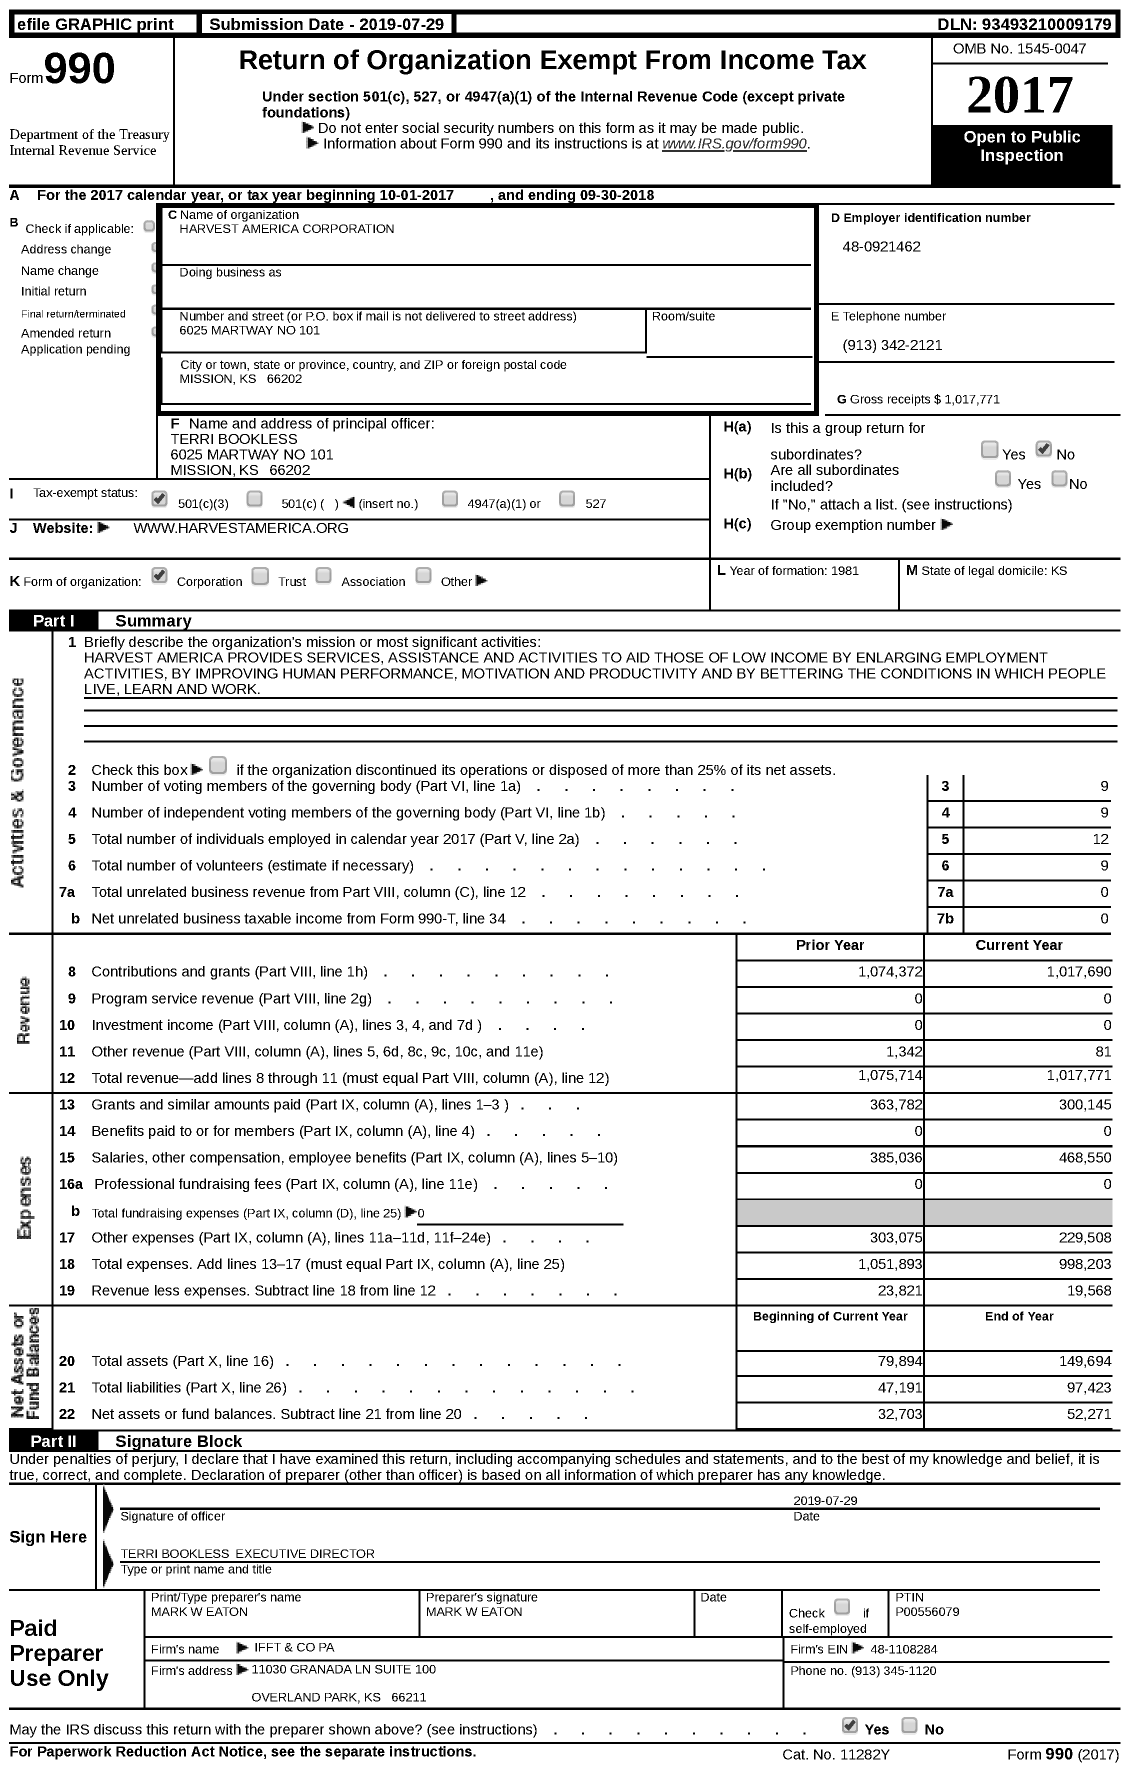 Image of first page of 2017 Form 990 for Harvest America Corporation